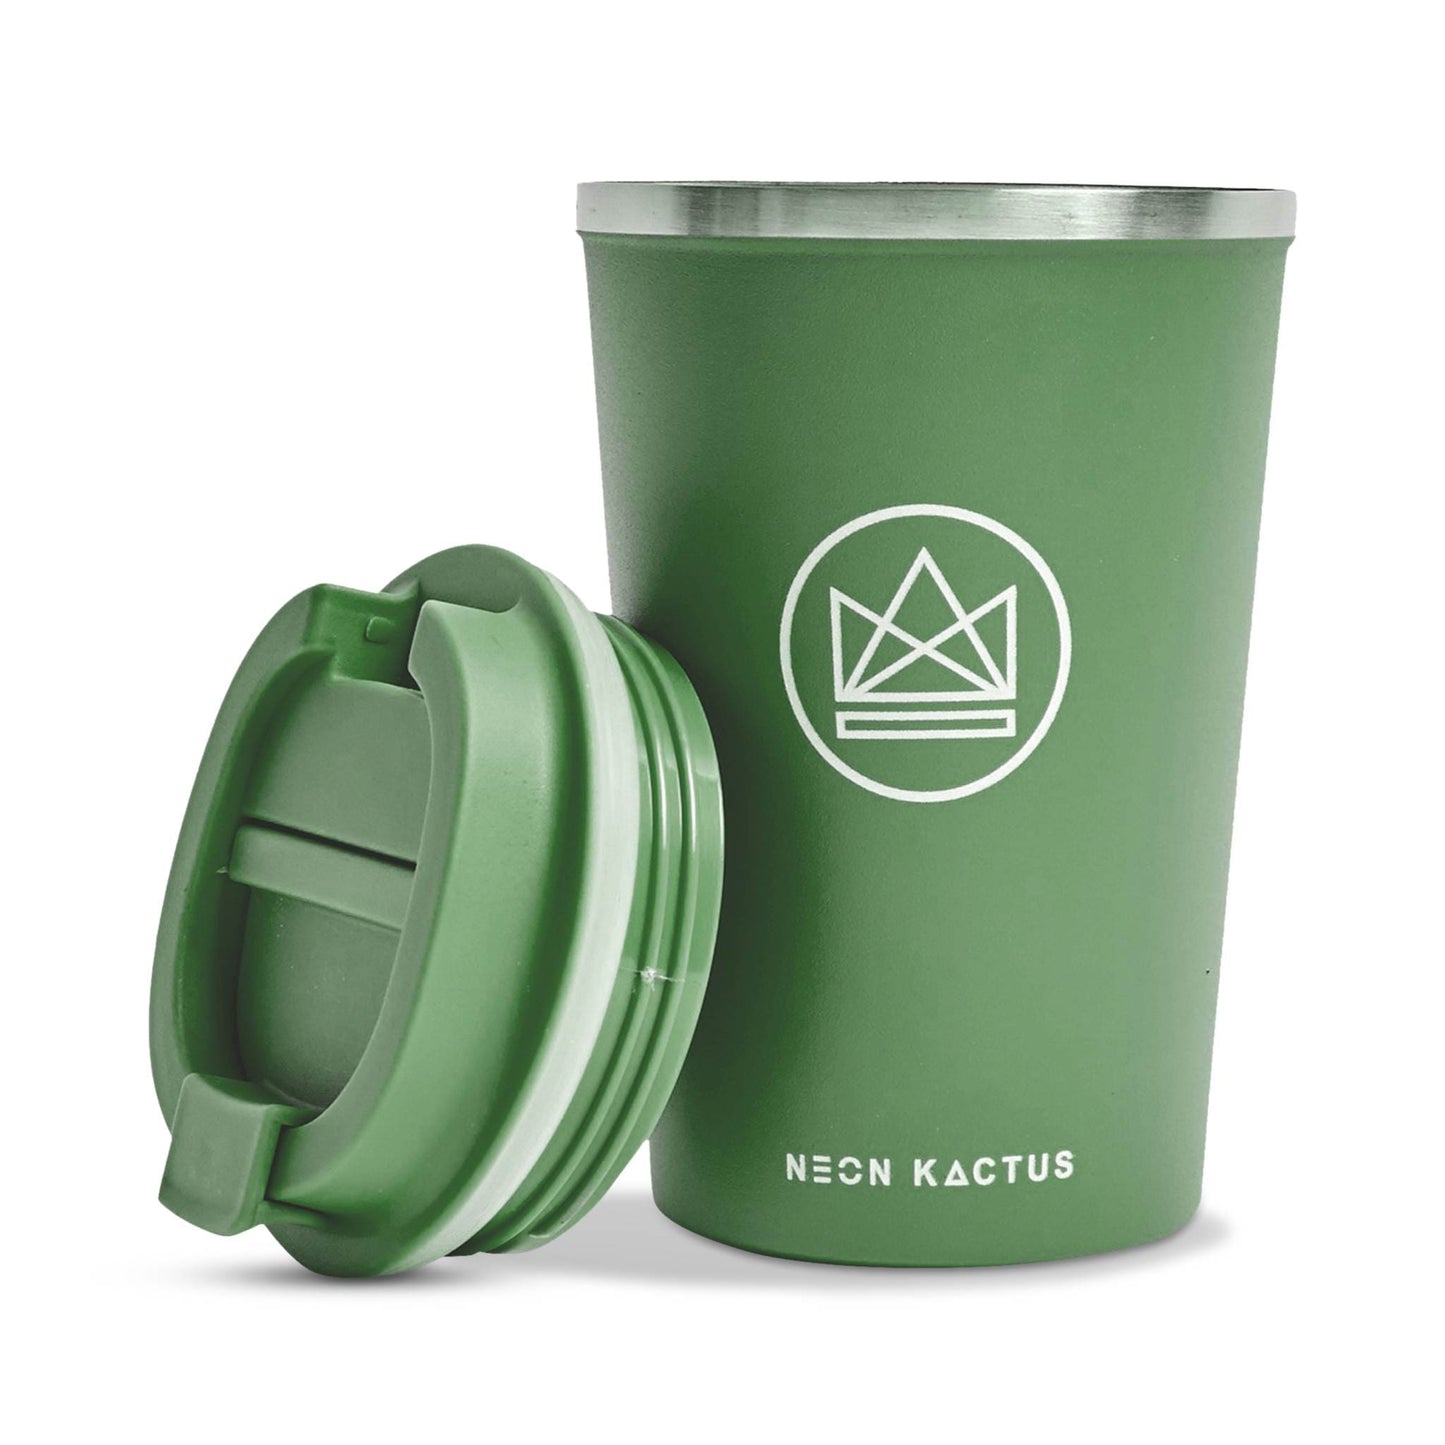 Neon Kactus - Double-Walled Coffee Cup, Reusable Coffee Cup with Resealable Lid, Silicone Seal, and Sleeve, Insulated Coffee Tumbler, Plastic-Free, L